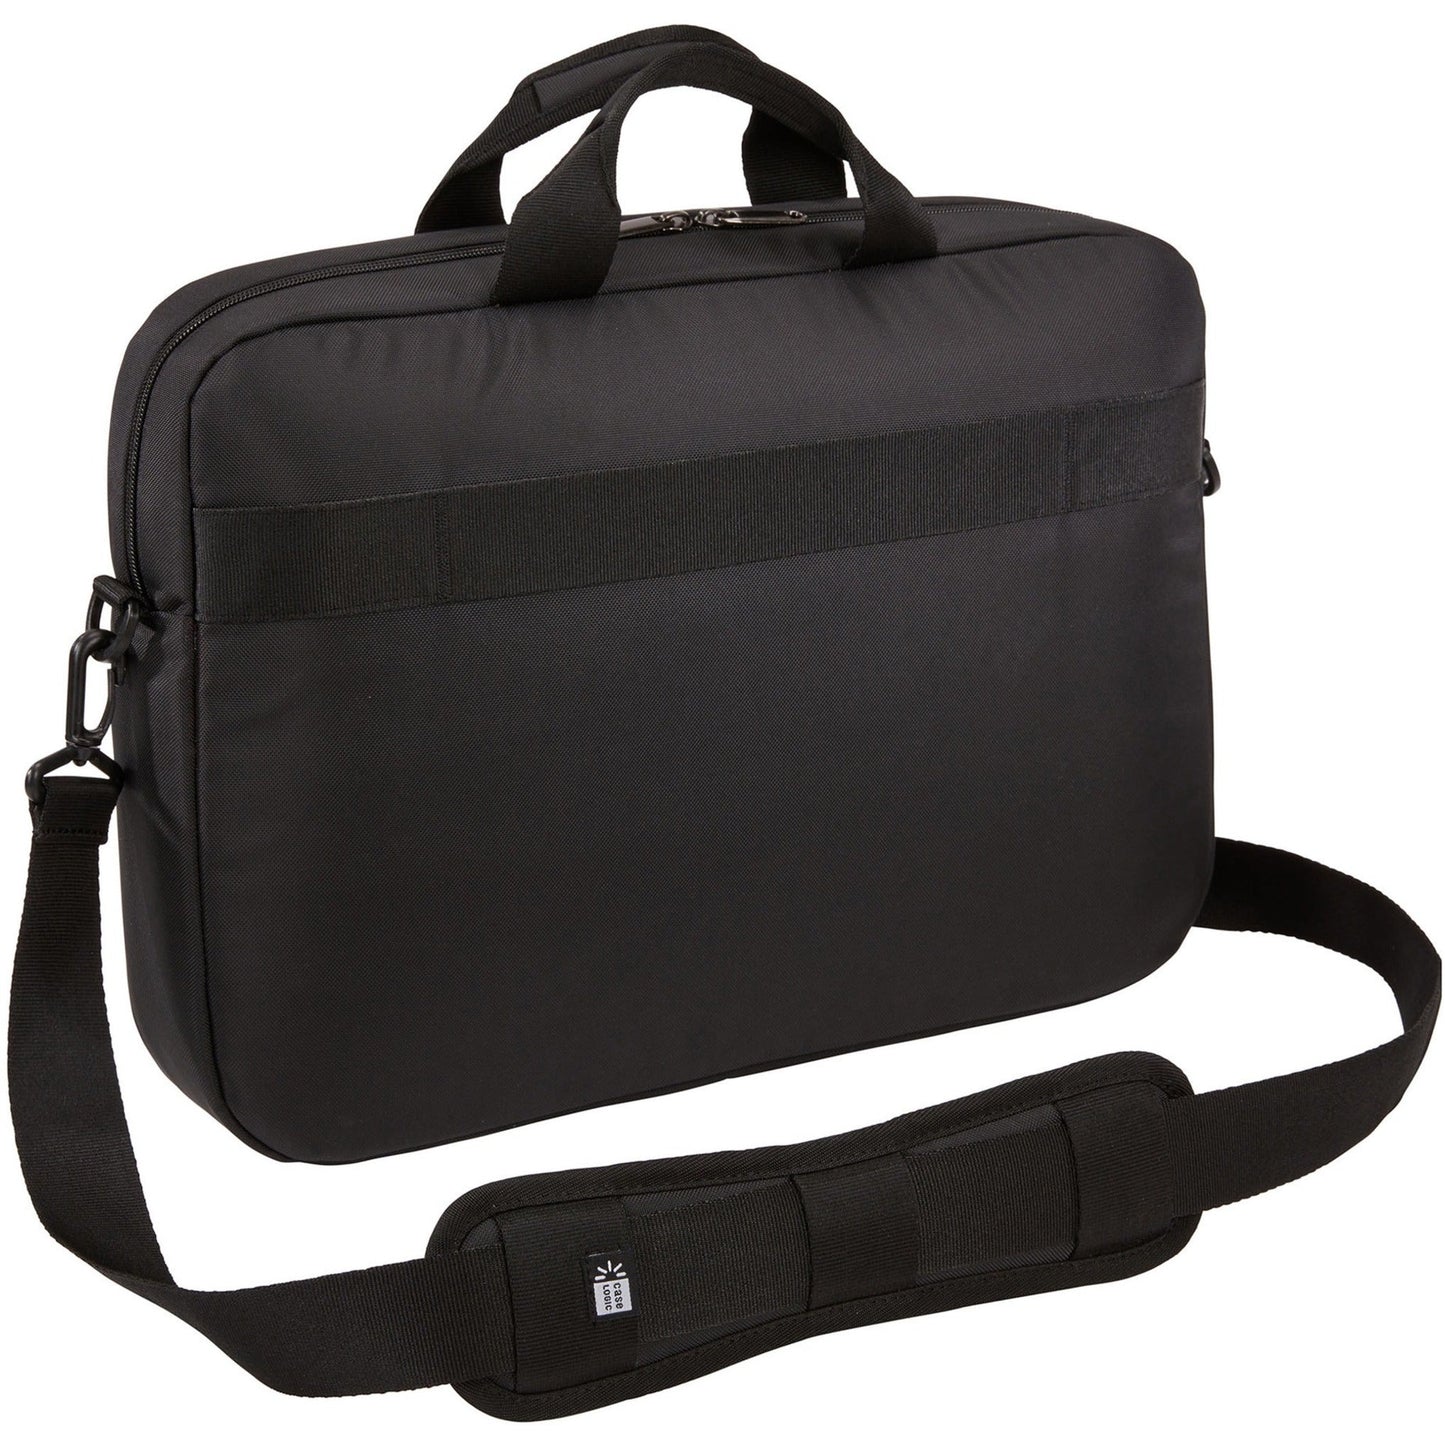 Case Logic Propel PROPA116 Travel/Luggage Case for 12" to 15.6" Notebook Tablet PC Accessories Key File Luggage - Black